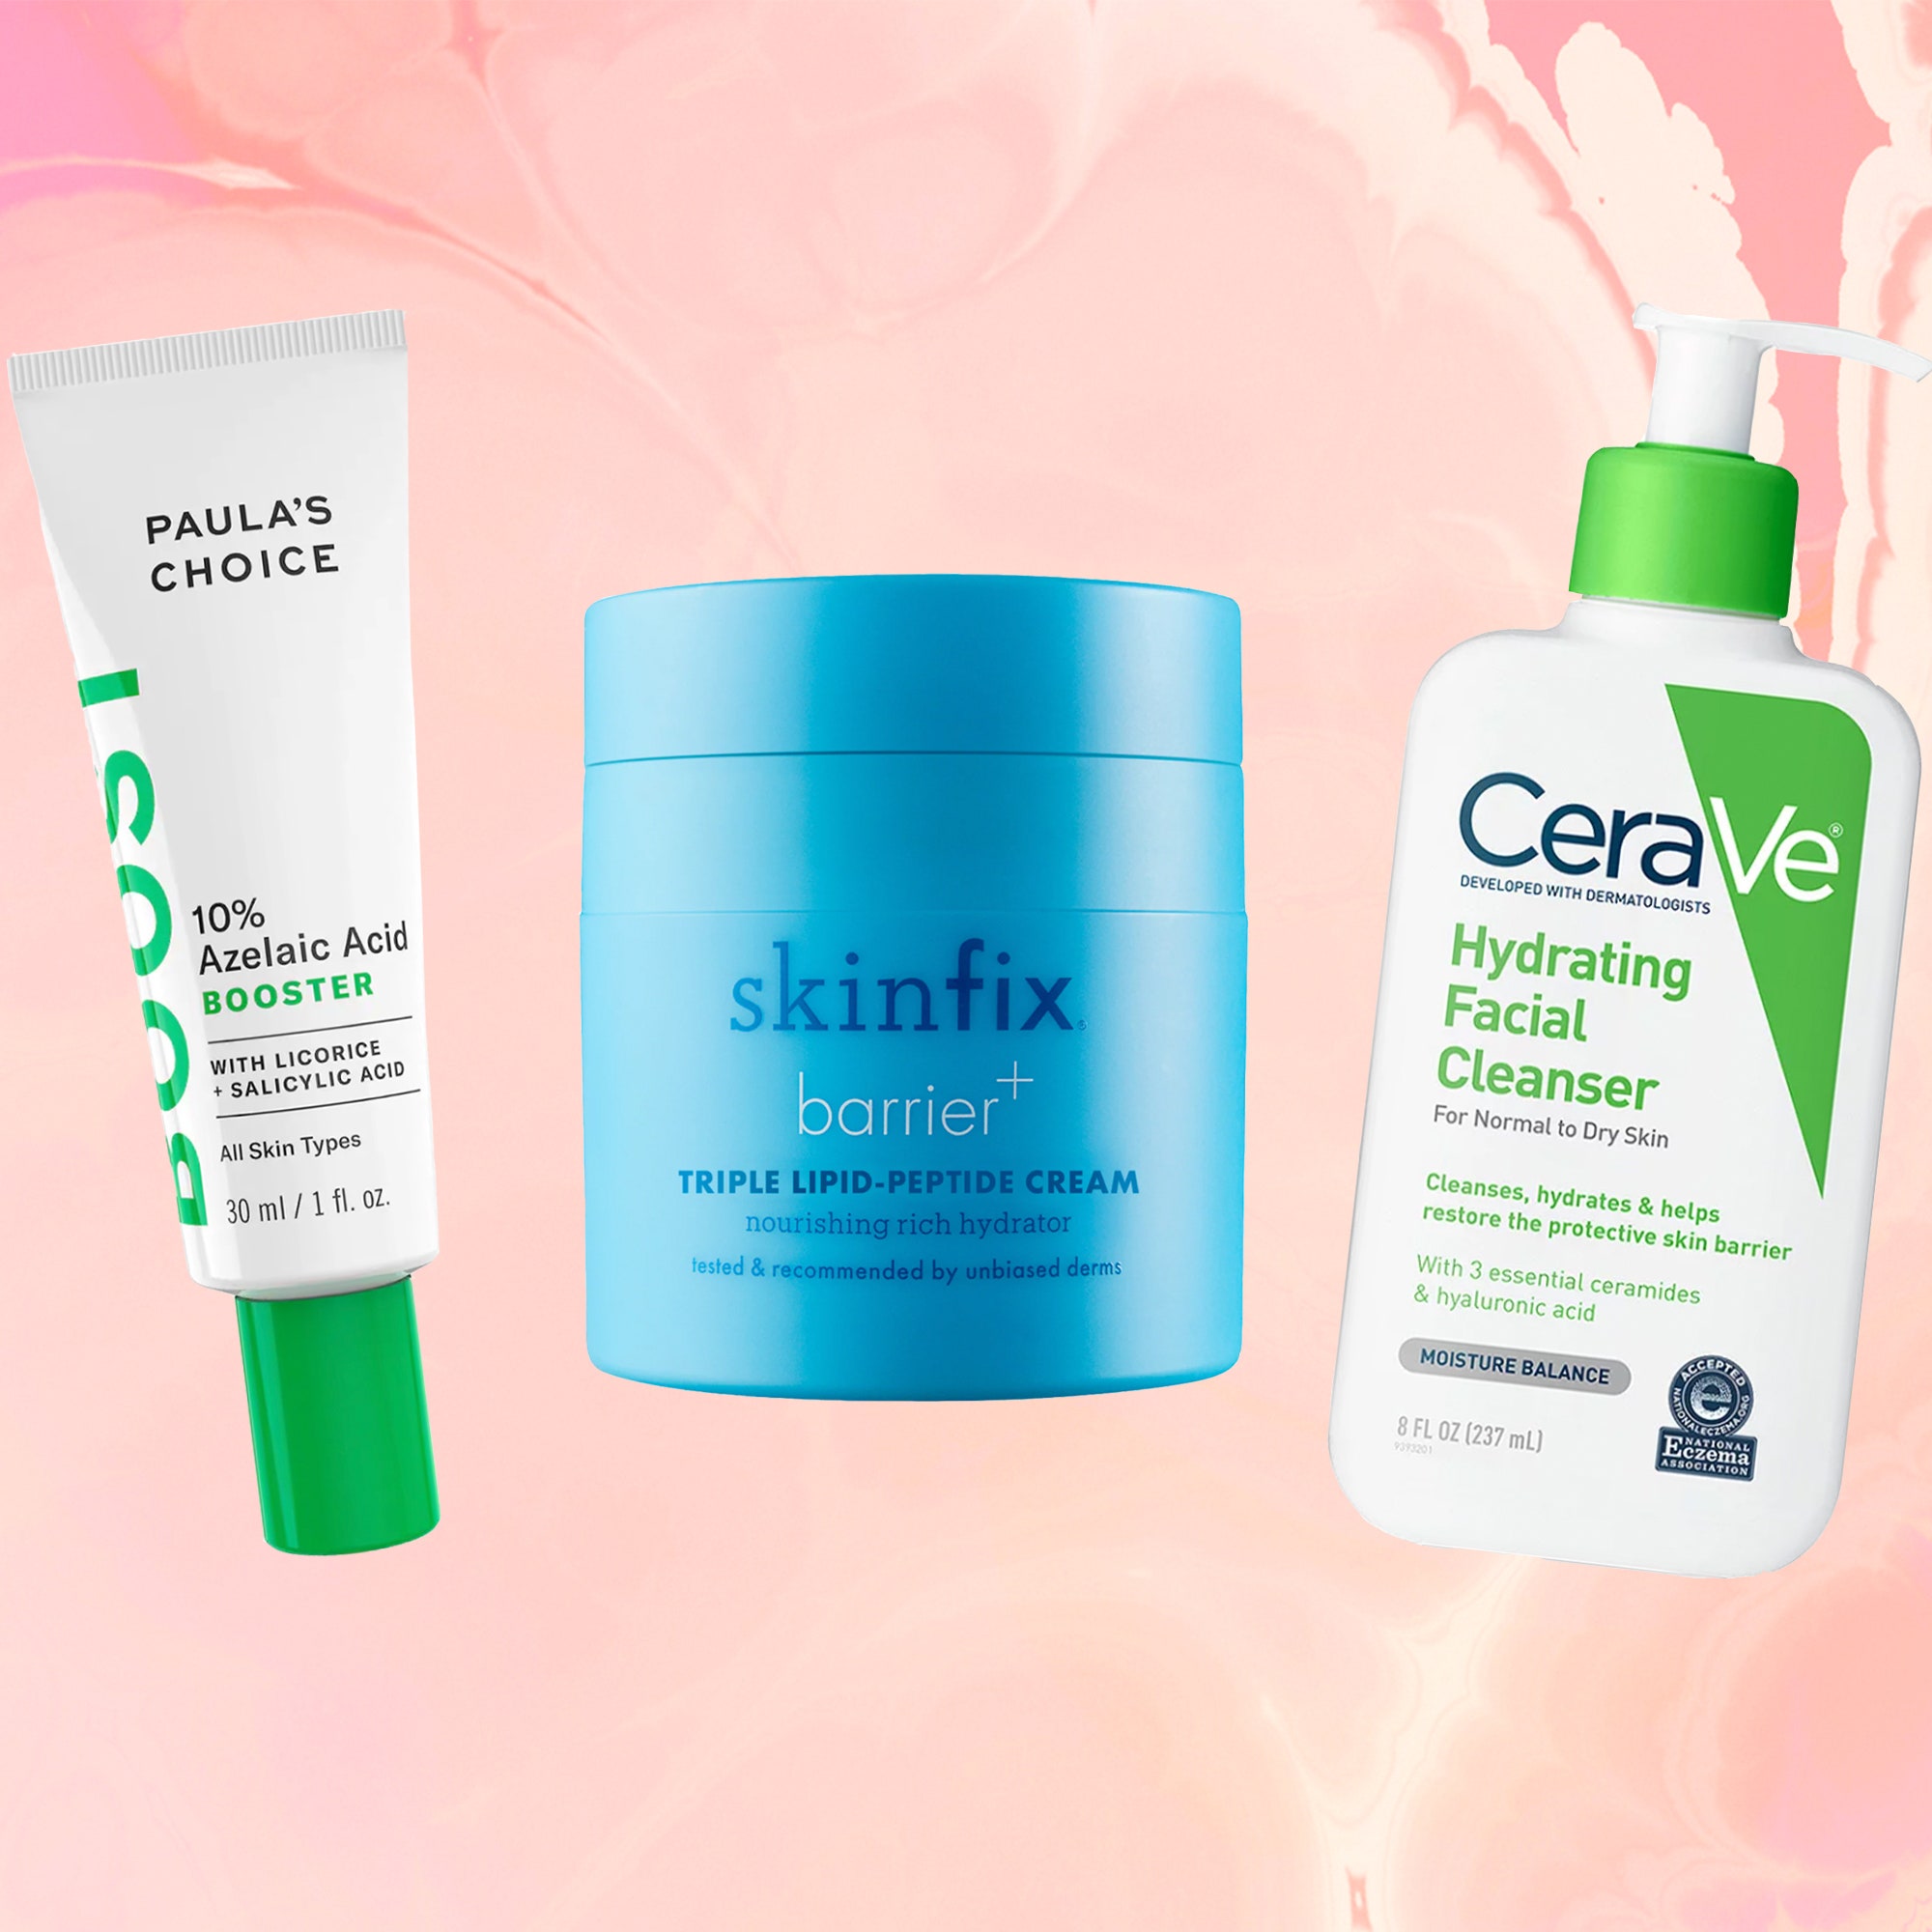 14 Rosacea Skin-Care Products That Dermatologists Approve of 2022 | Allure